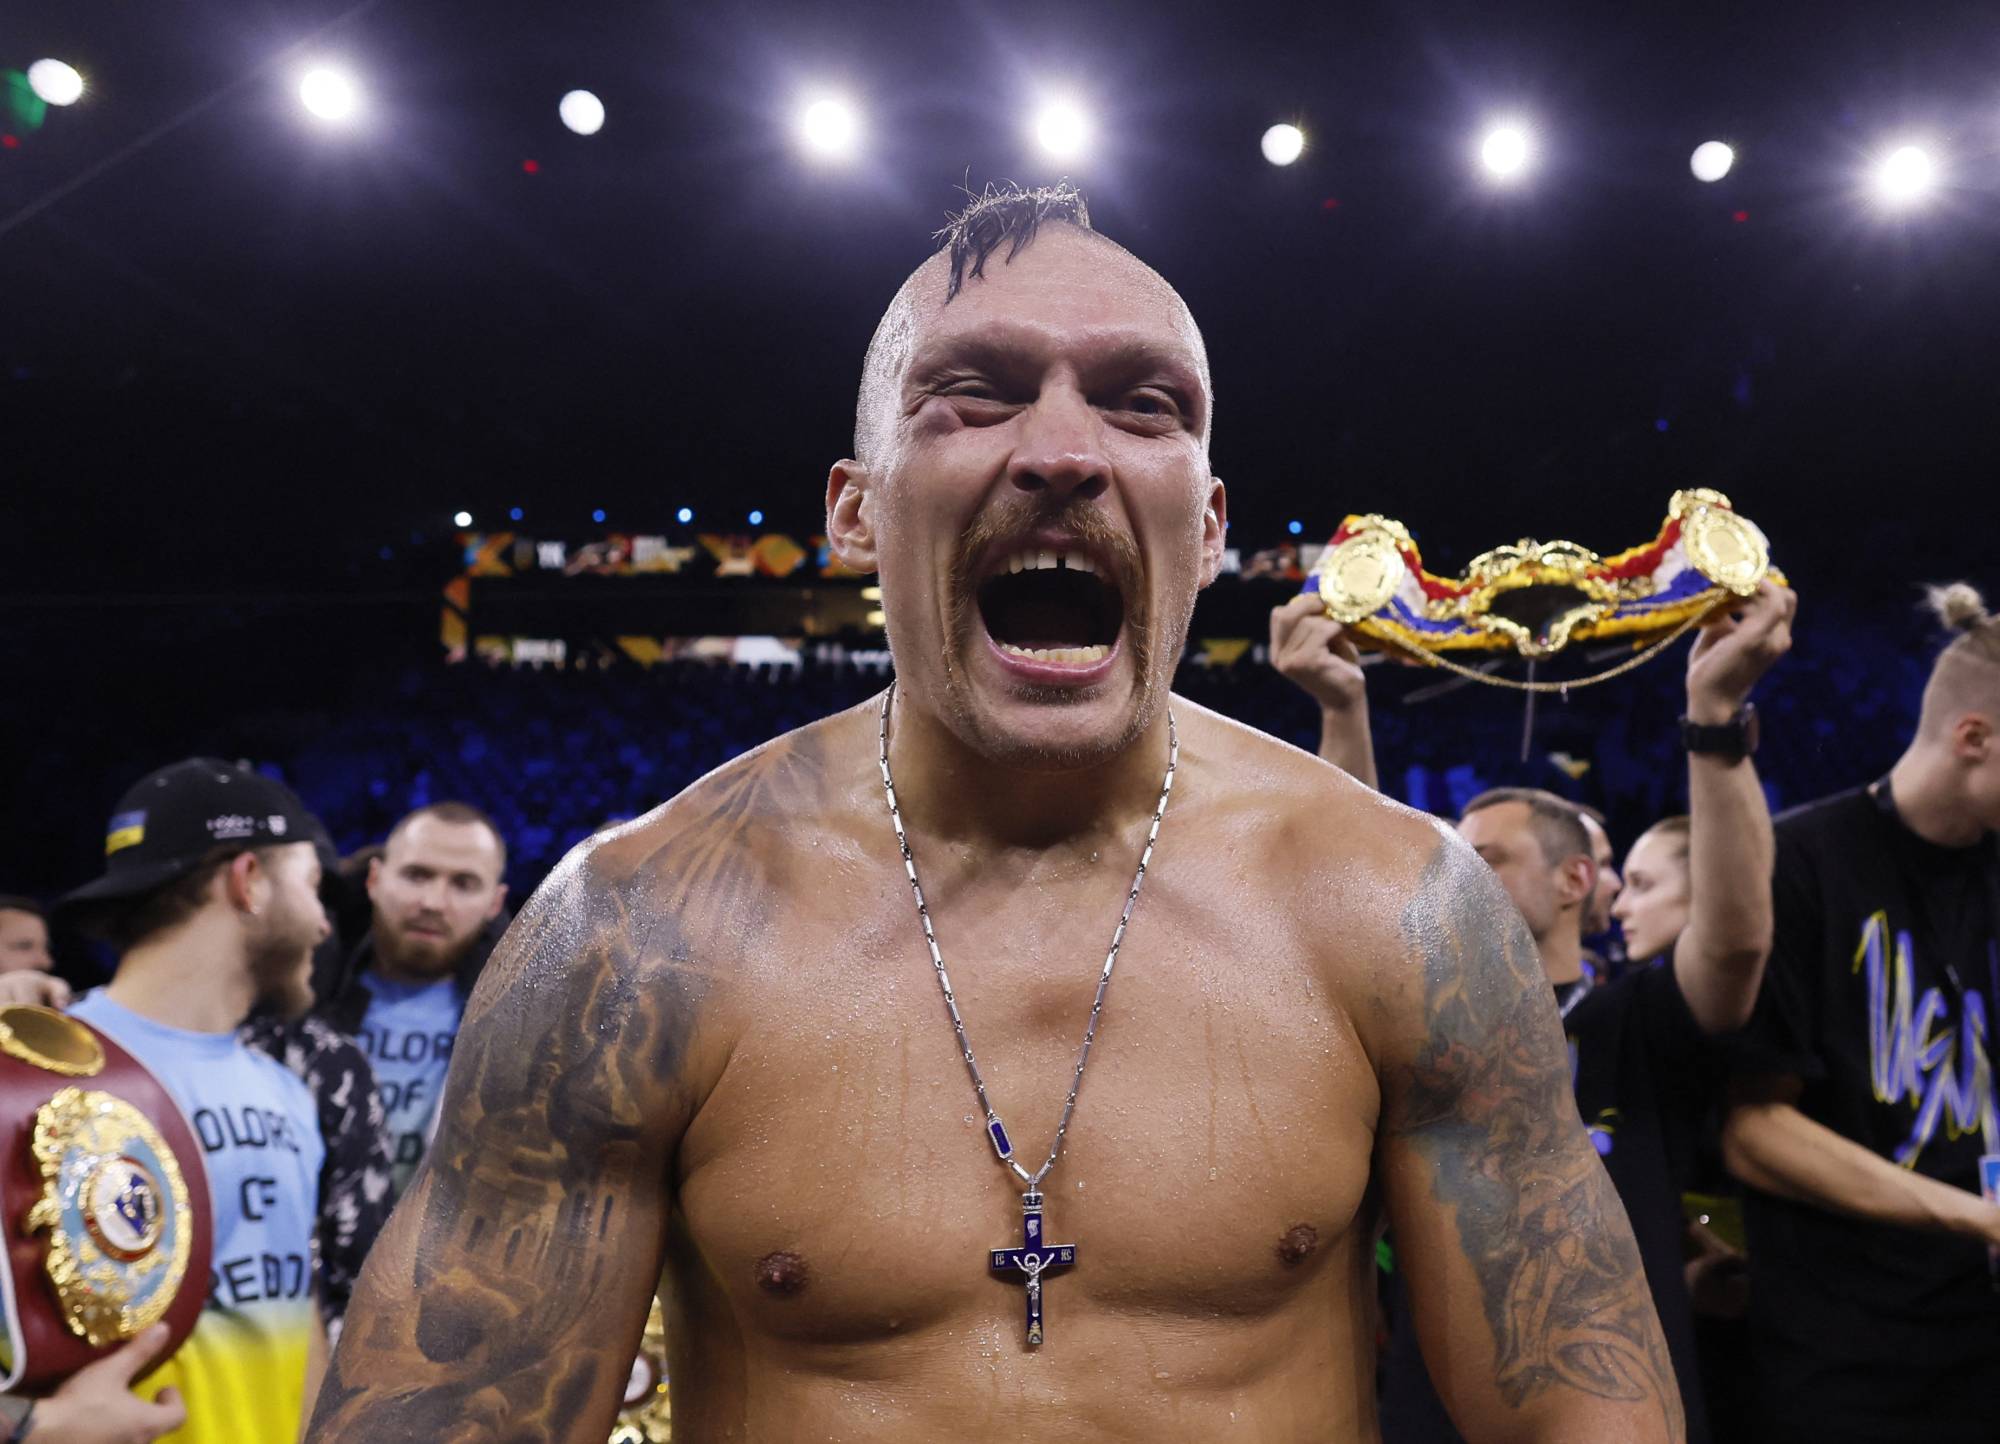 Ukraines Usyk motivated by boxing and memory of friend lost to war